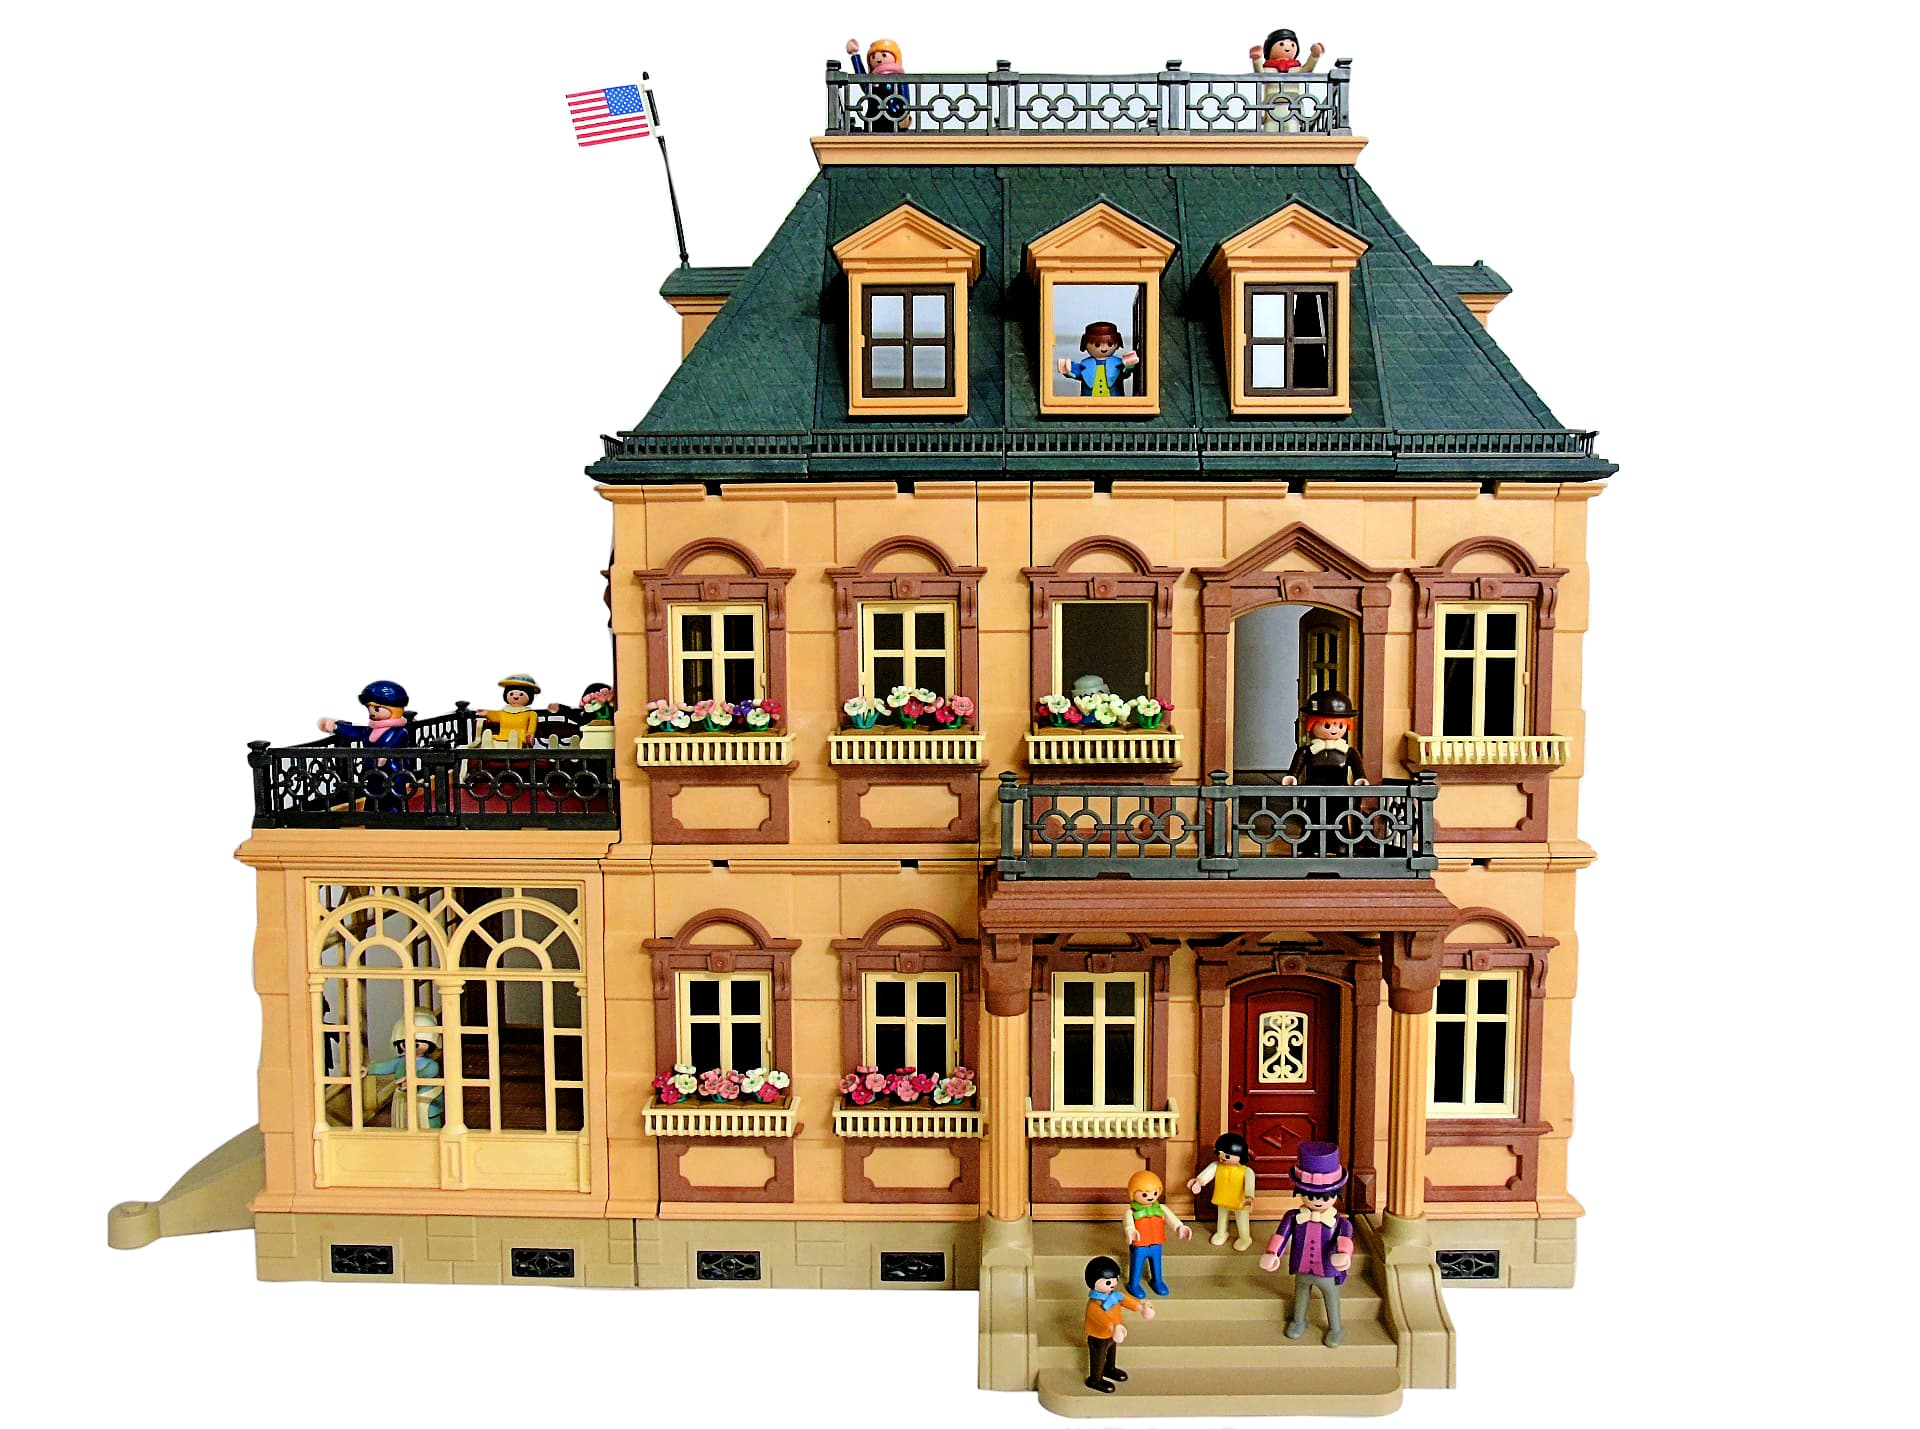 Playmobil maison des chats - Playmobil | Beebs